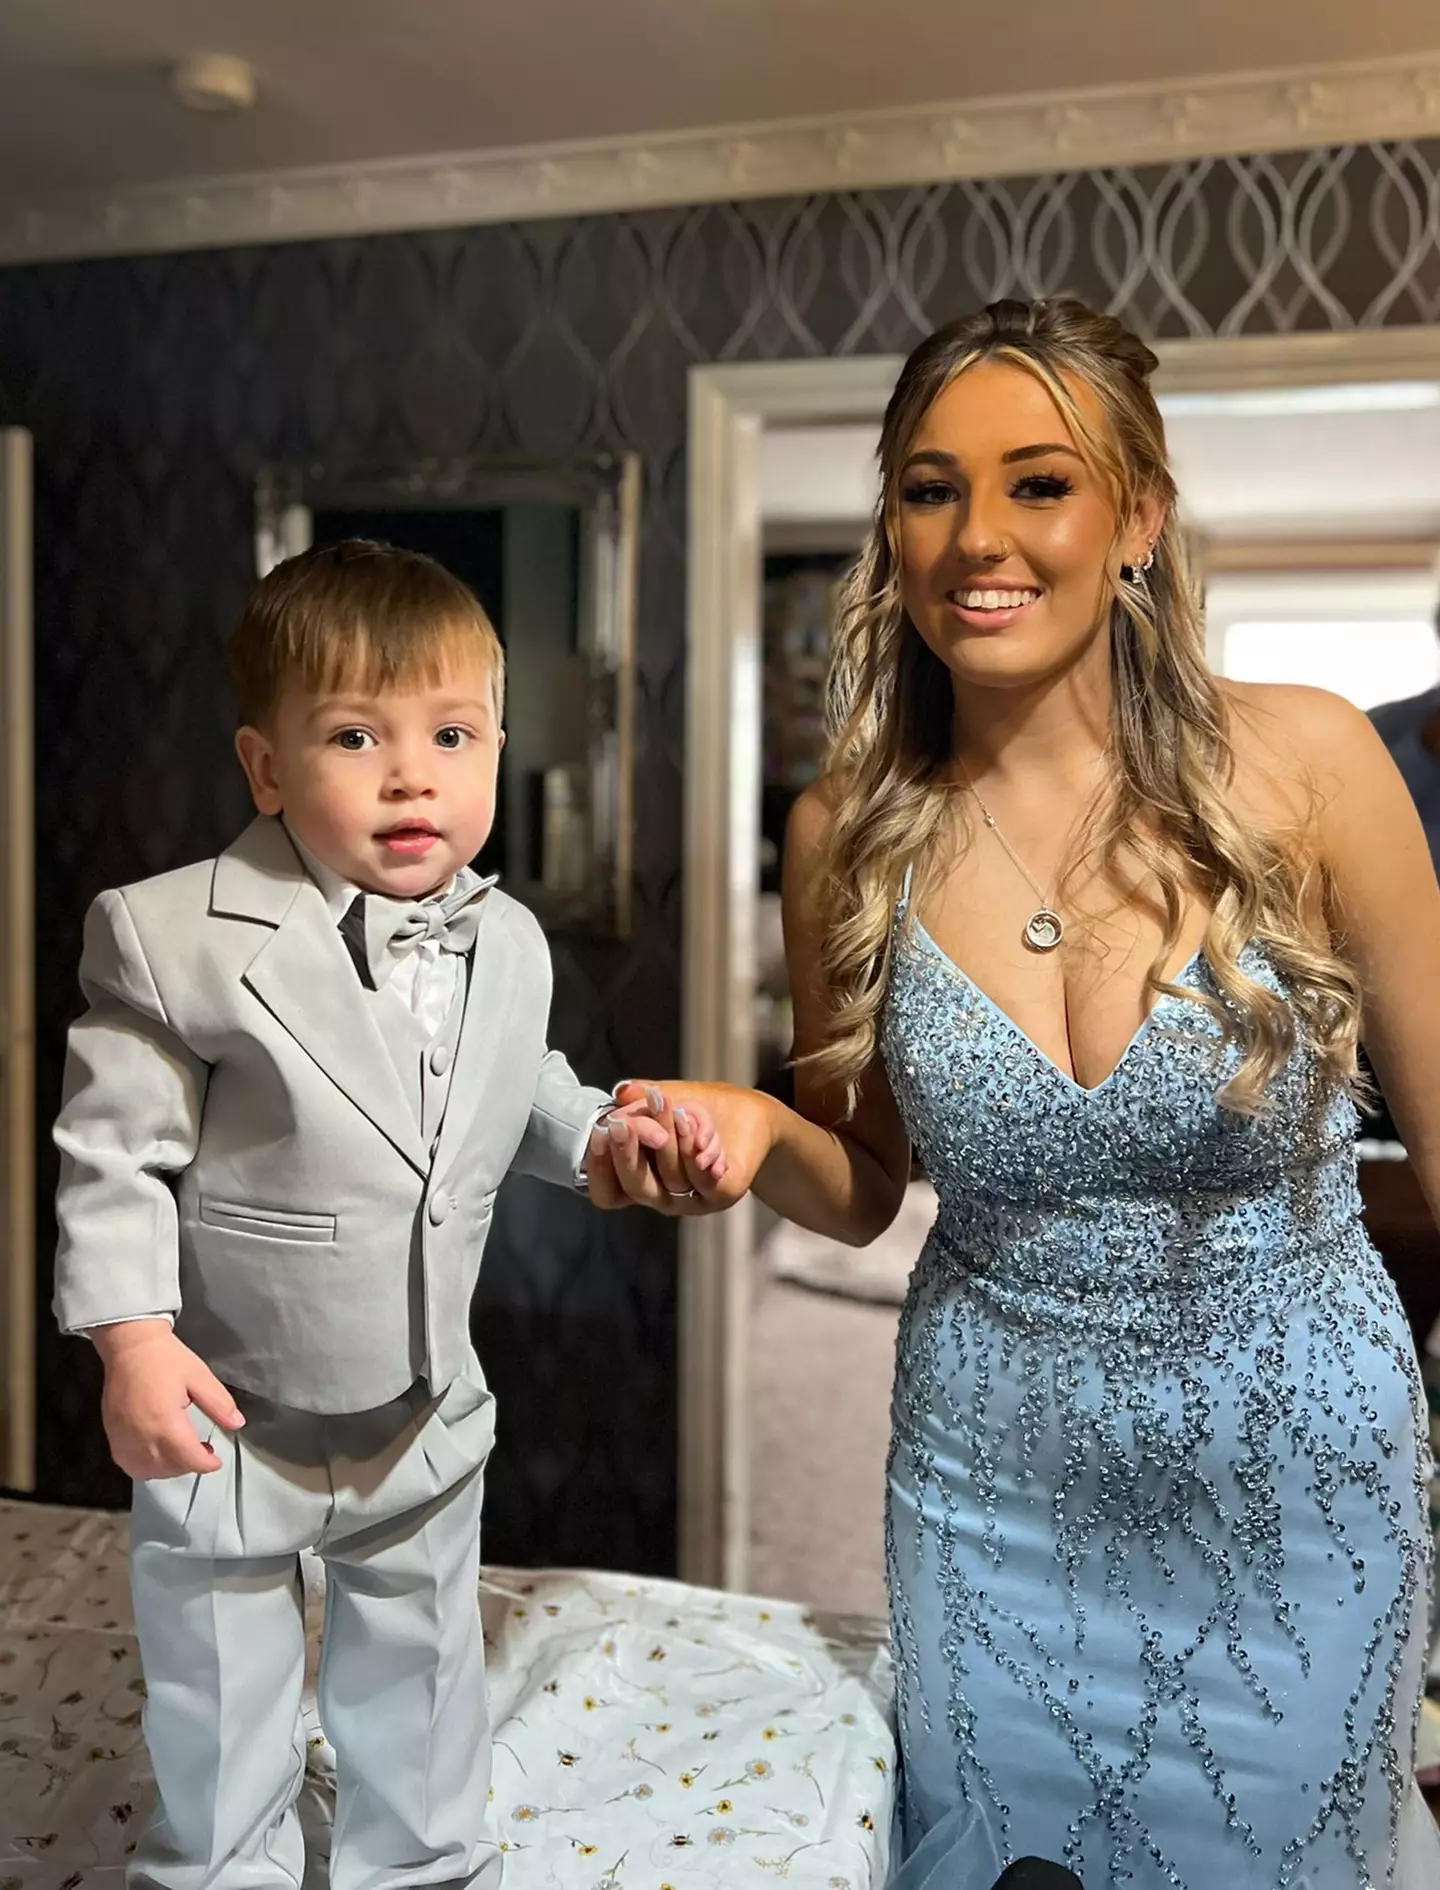 The teen mum took her son to prom.